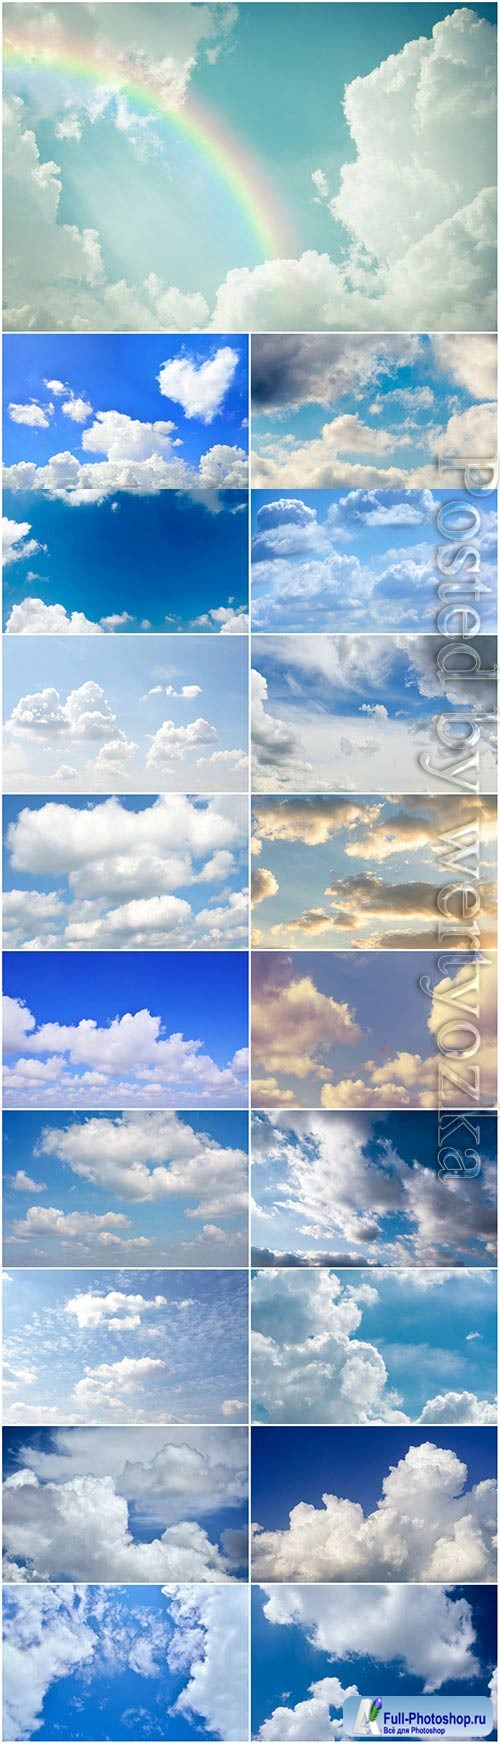 Beautiful sky with clouds stock photo